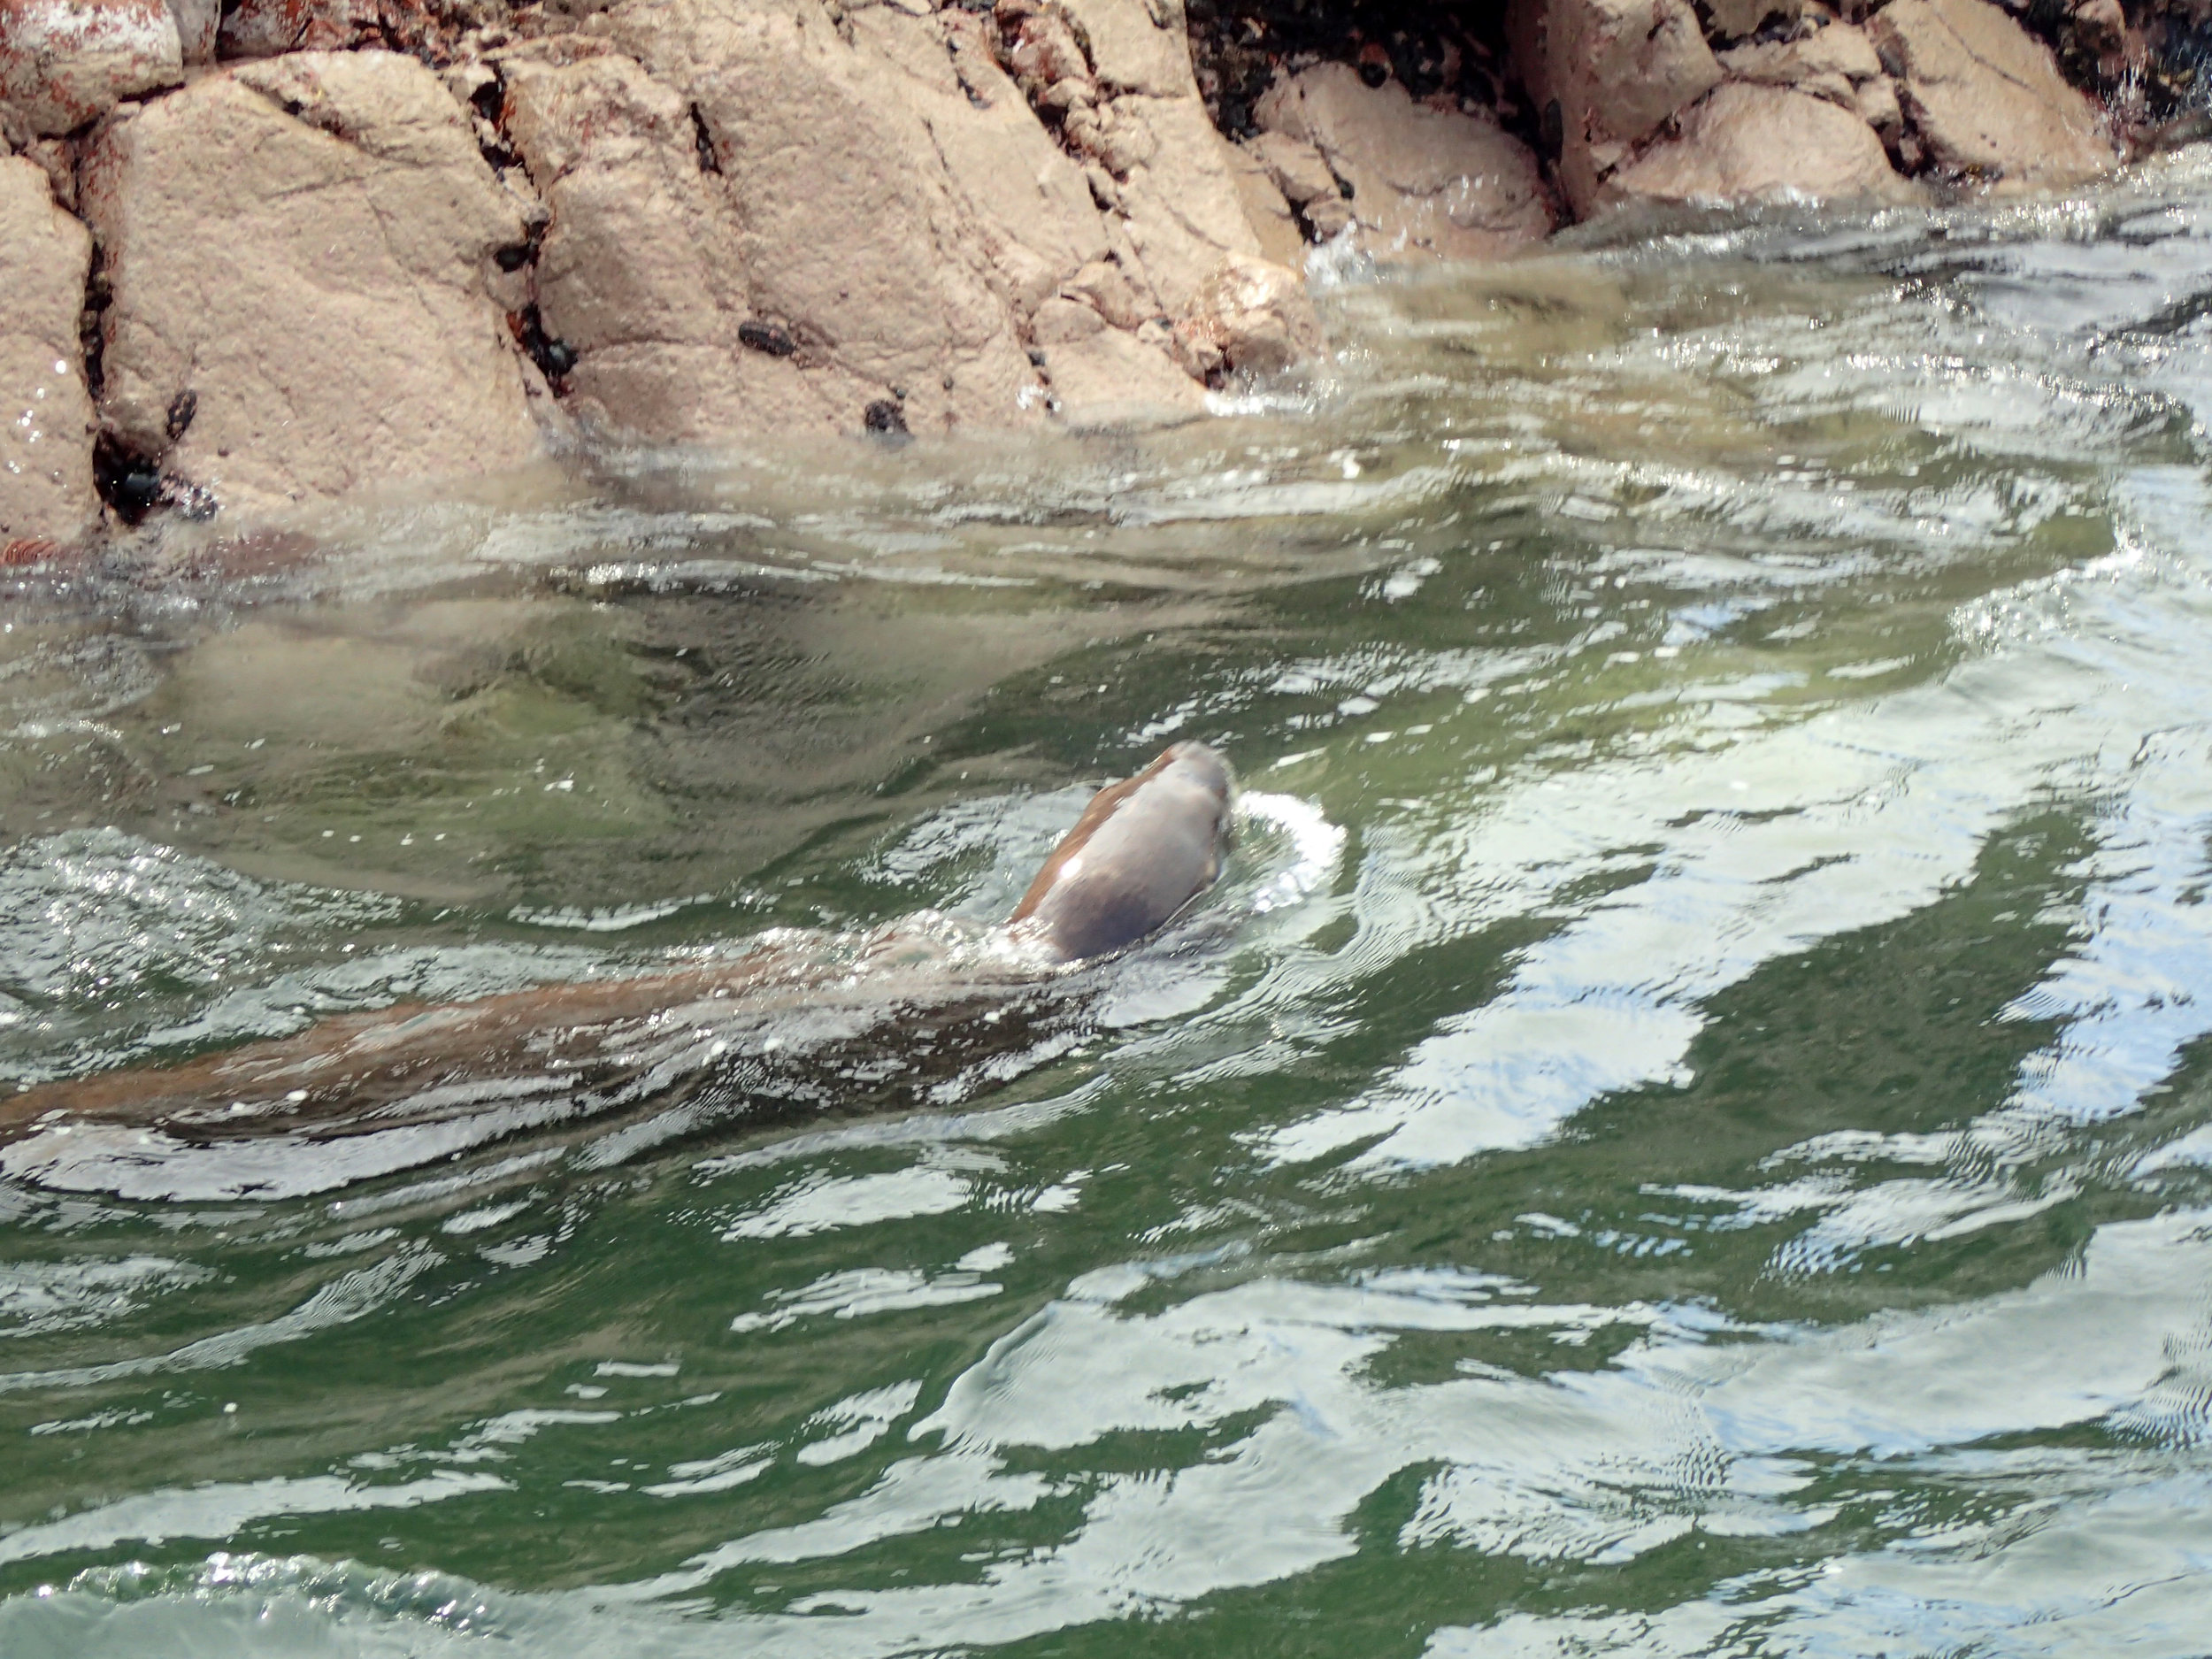 swimming sea lion from behind.jpg